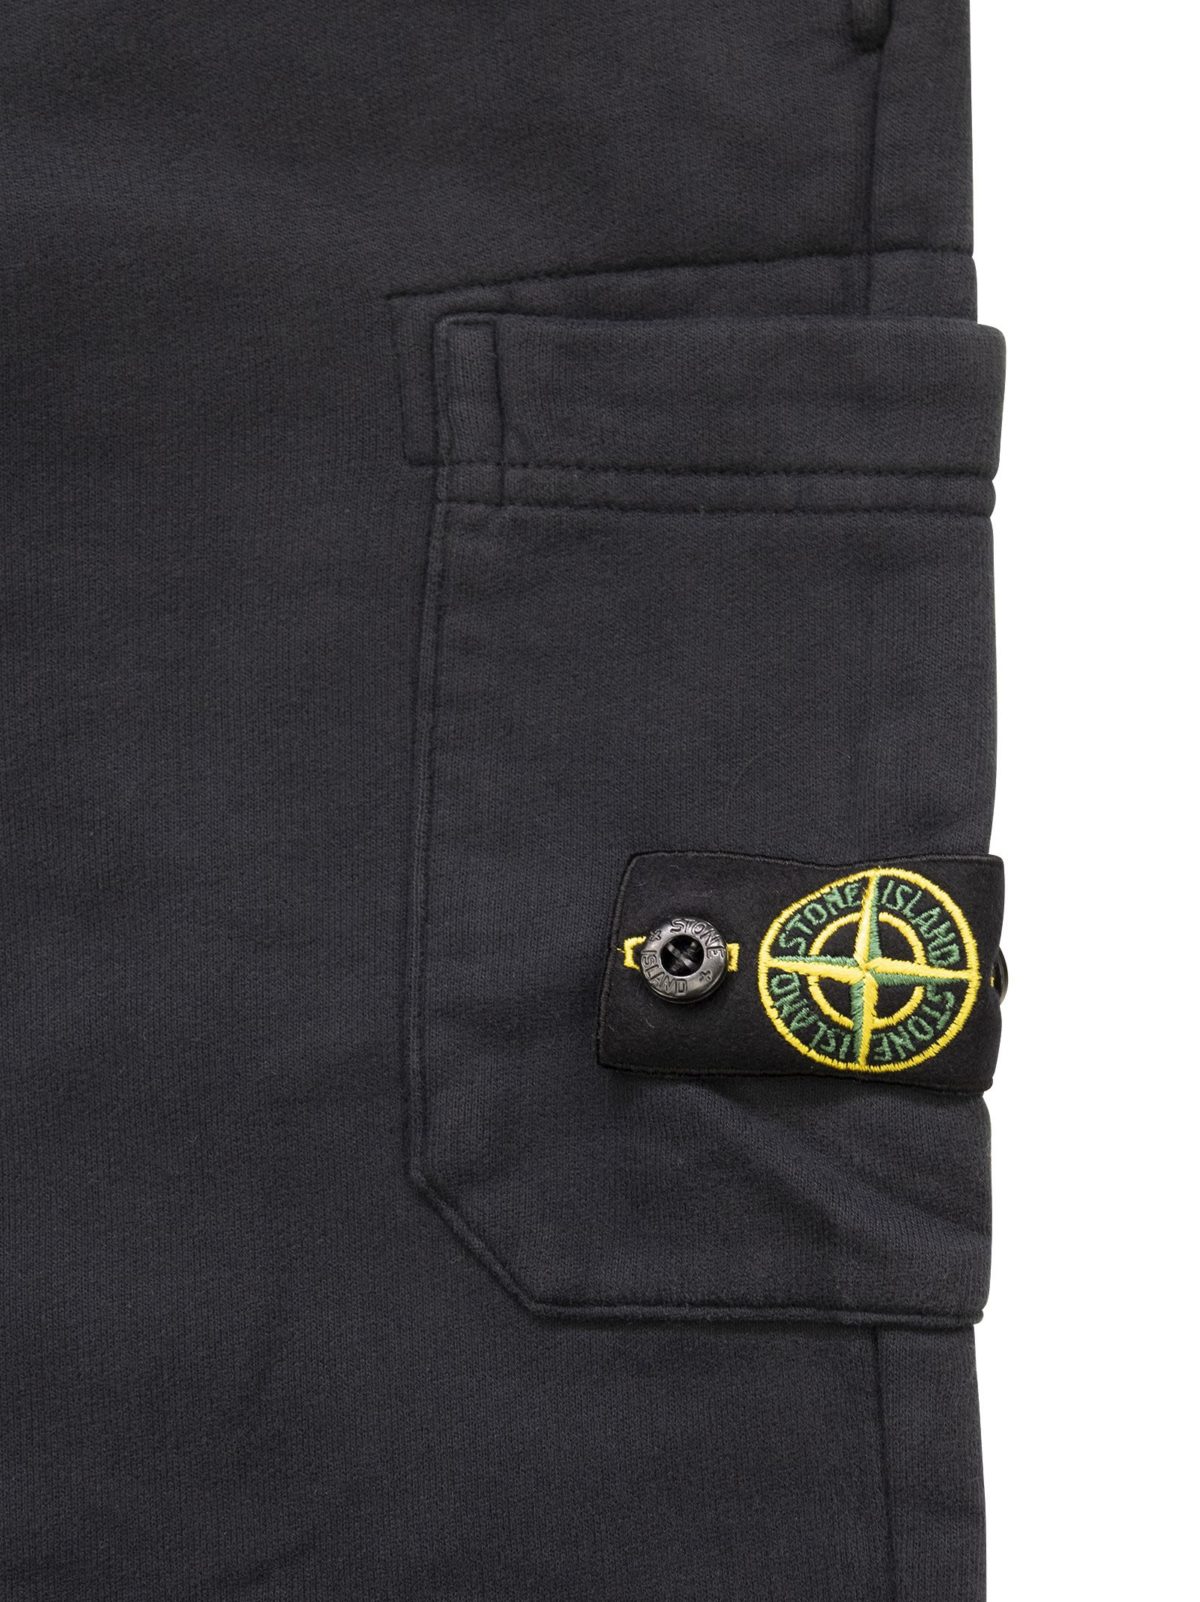 Cotton trousers with Stone Island badge - Bellettini.com